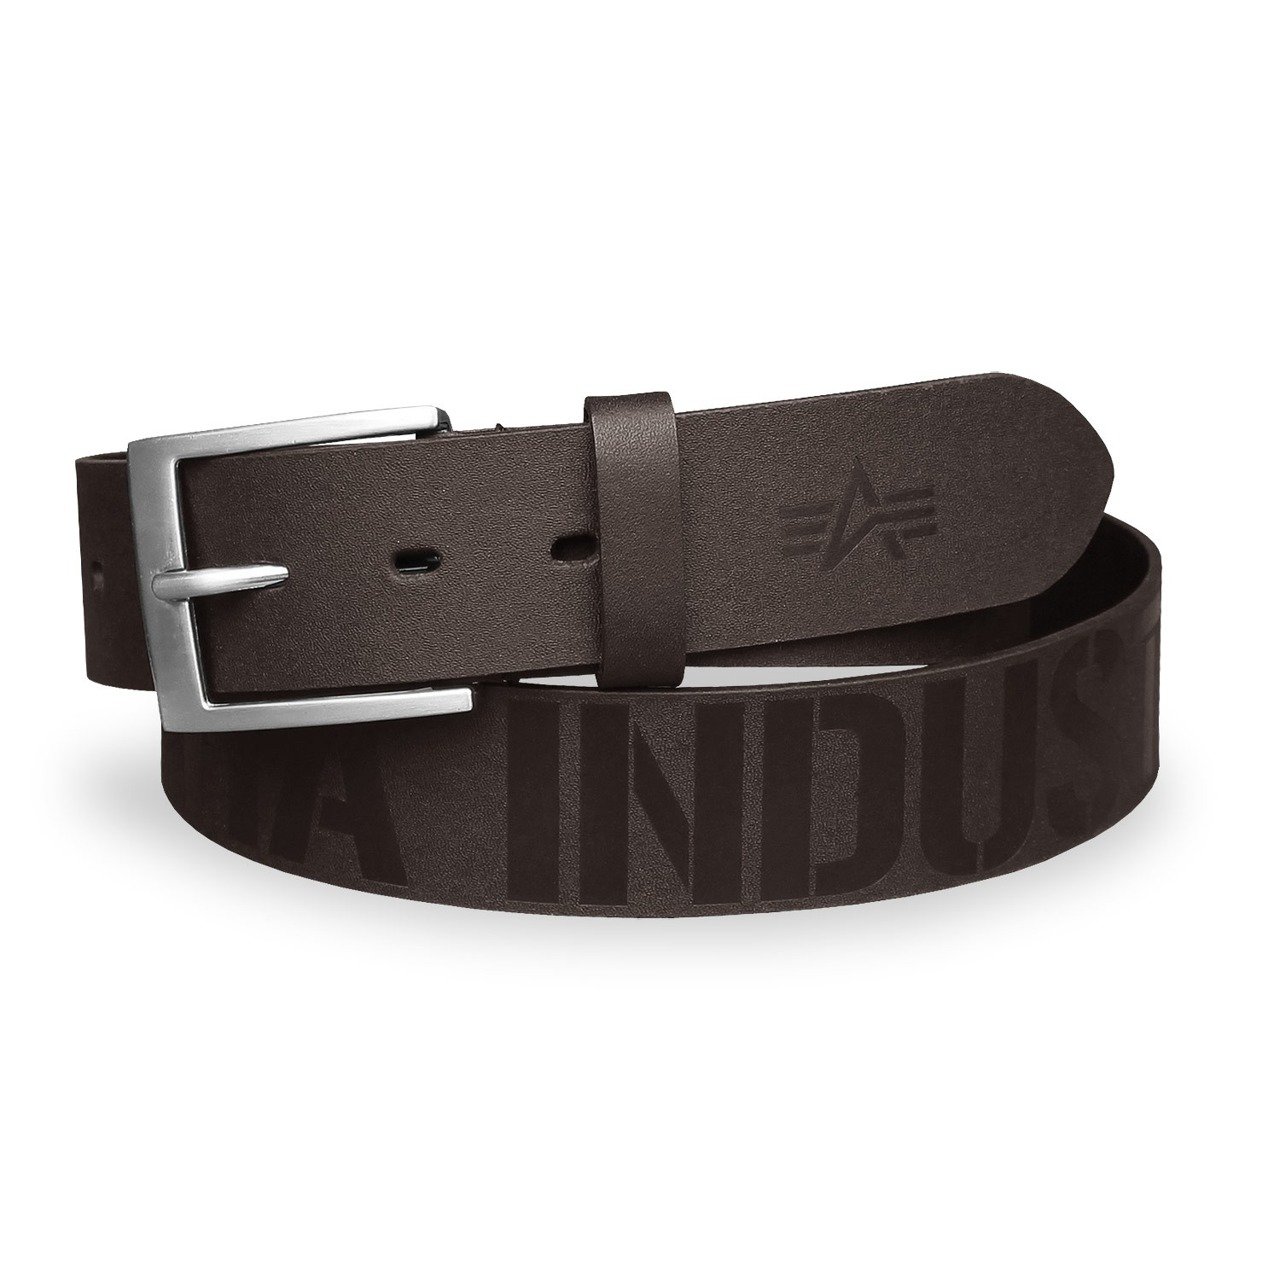 Embossed Alpha Belt brown | Apparel \ Belts \ Combat Belts  militarysurplus.eu | Army Navy Surplus - Tactical | Big variety - Cheap  prices | Military Surplus, Clothing, Law Enforcement, Boots, Outdoor &  Tactical Gear